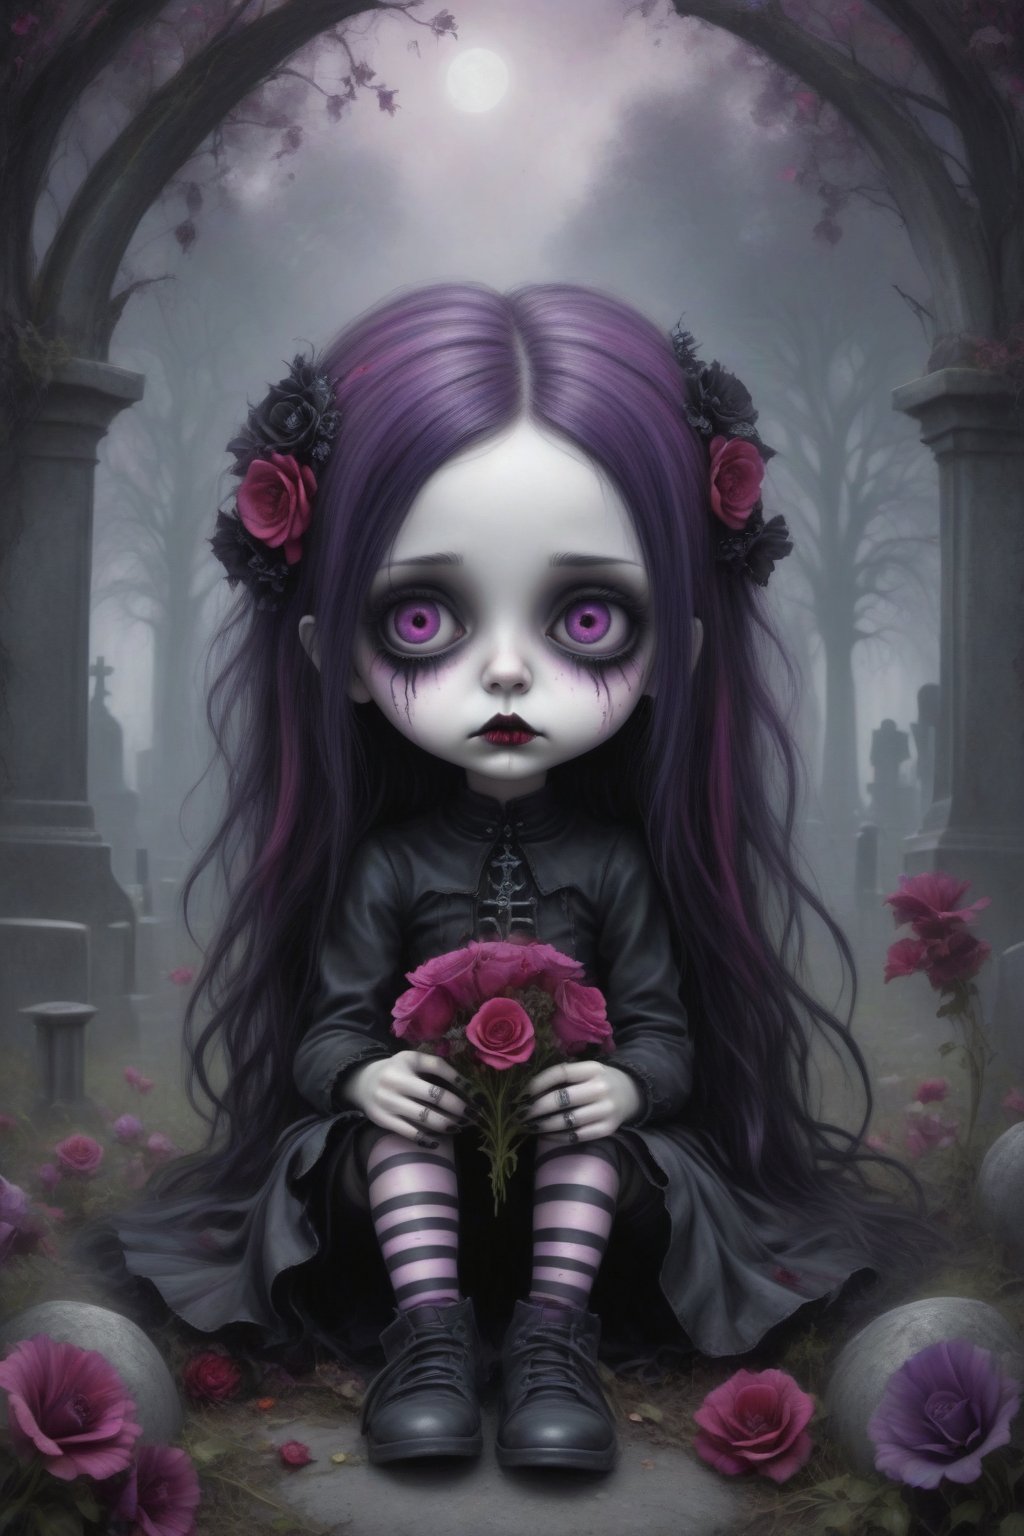 A goth female with long hair streaked in shades of purple, lilac, lavender, pink, and magenta. She is sitting cross-legged in the middle of a cemetery, holding a bouquet of red and black flowers, looking up slightly with a sad expression, goth person